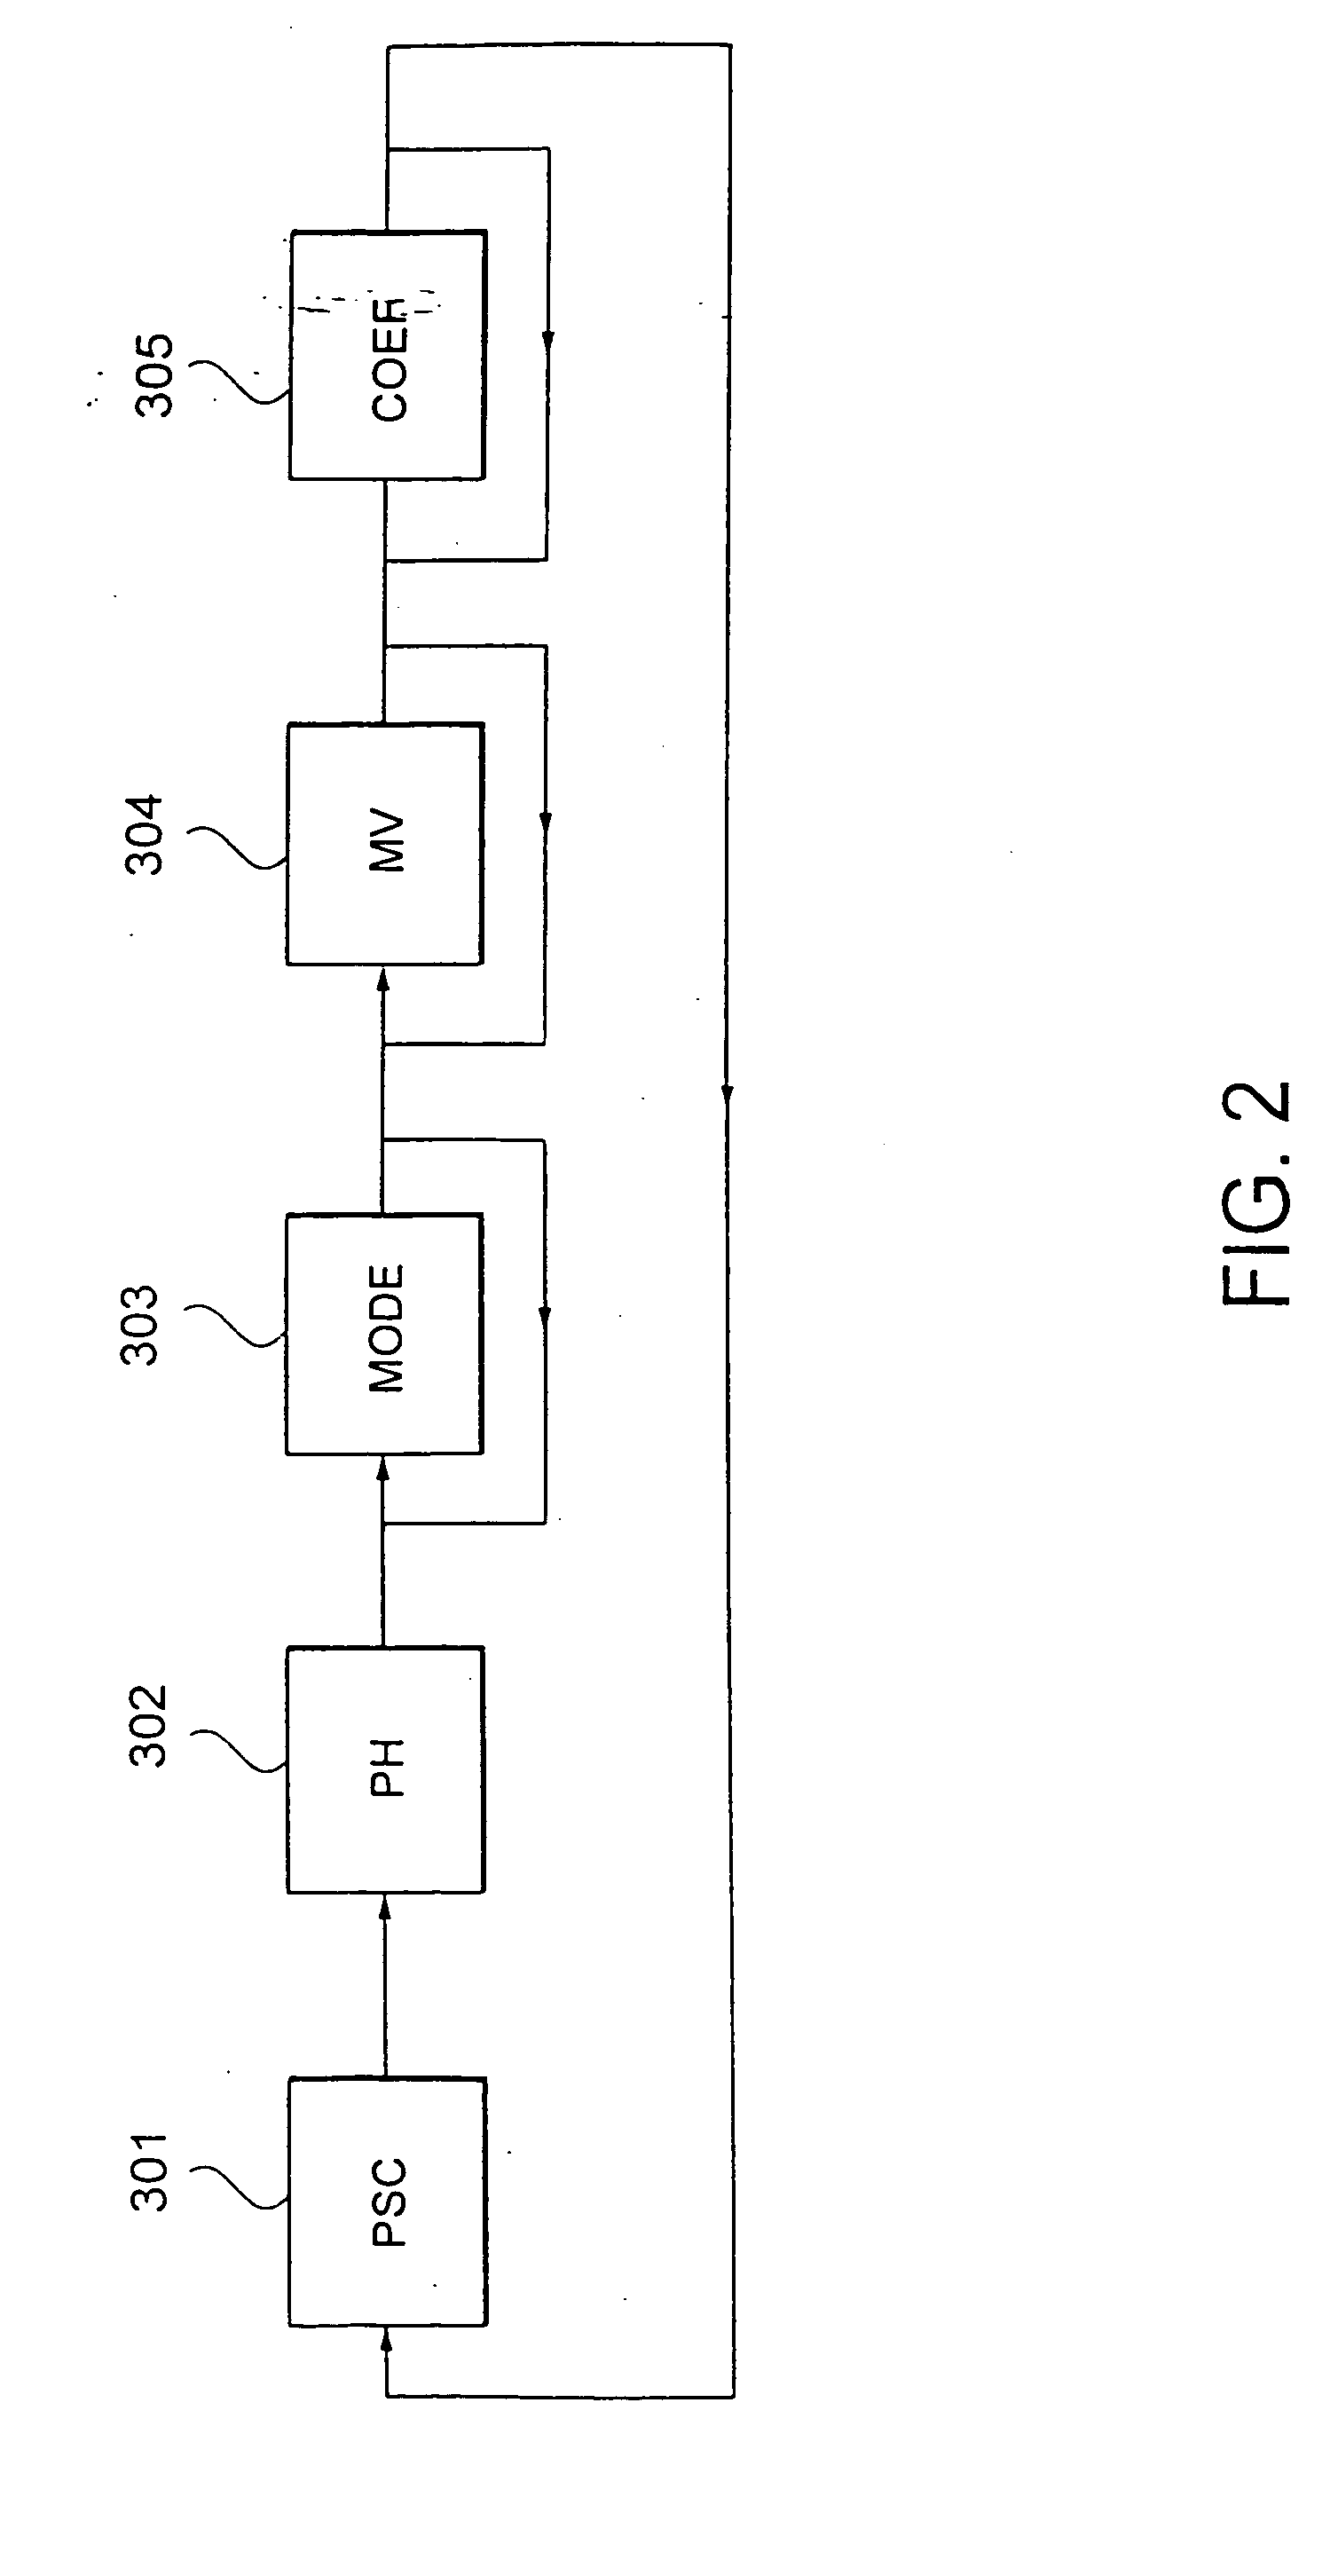 Coding system and decoding system